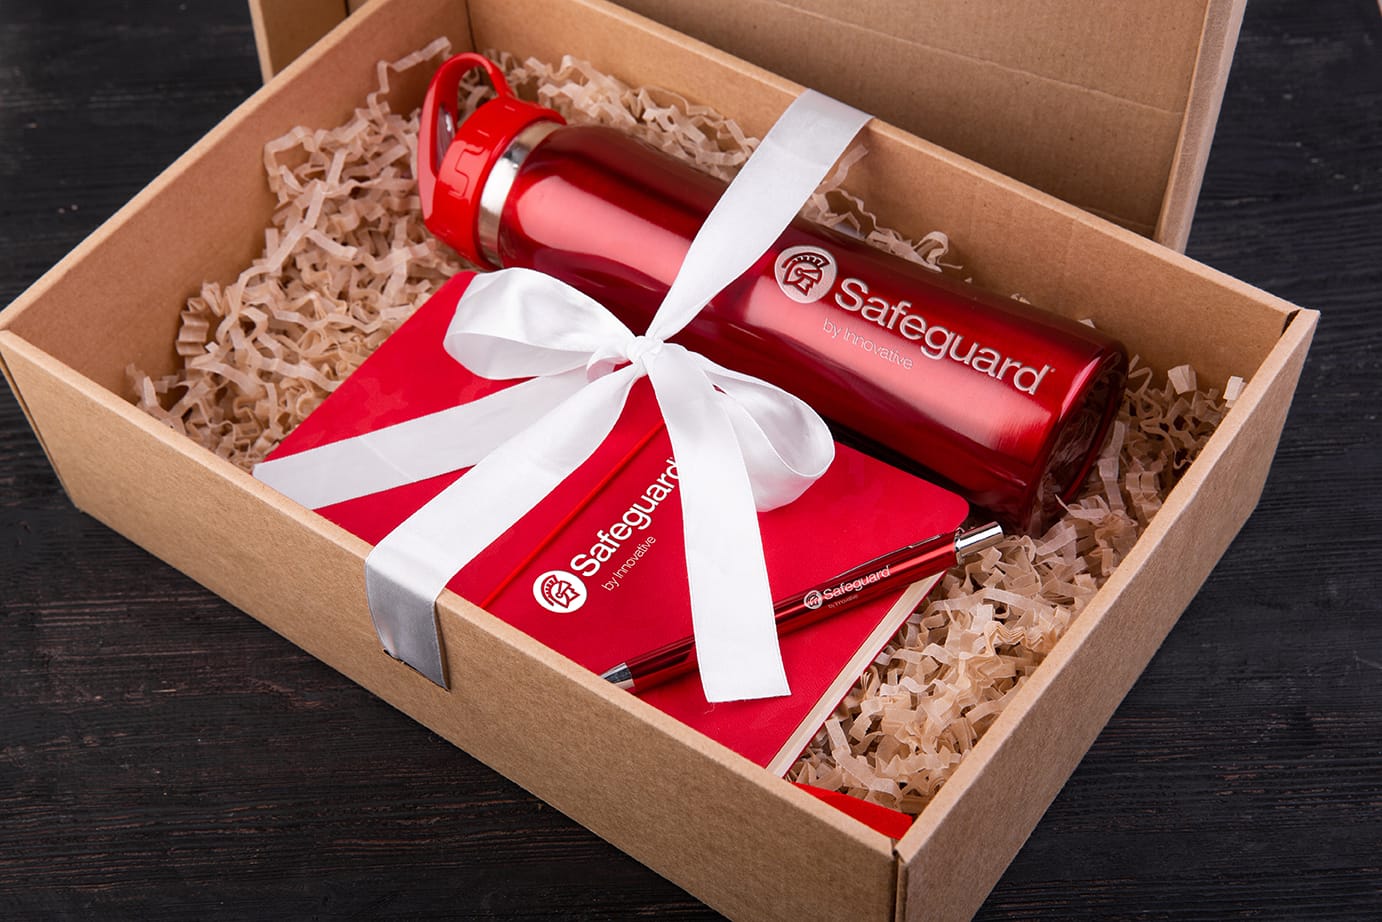 An opened gift box with a Safeguard water bottle, notepad, and pen.